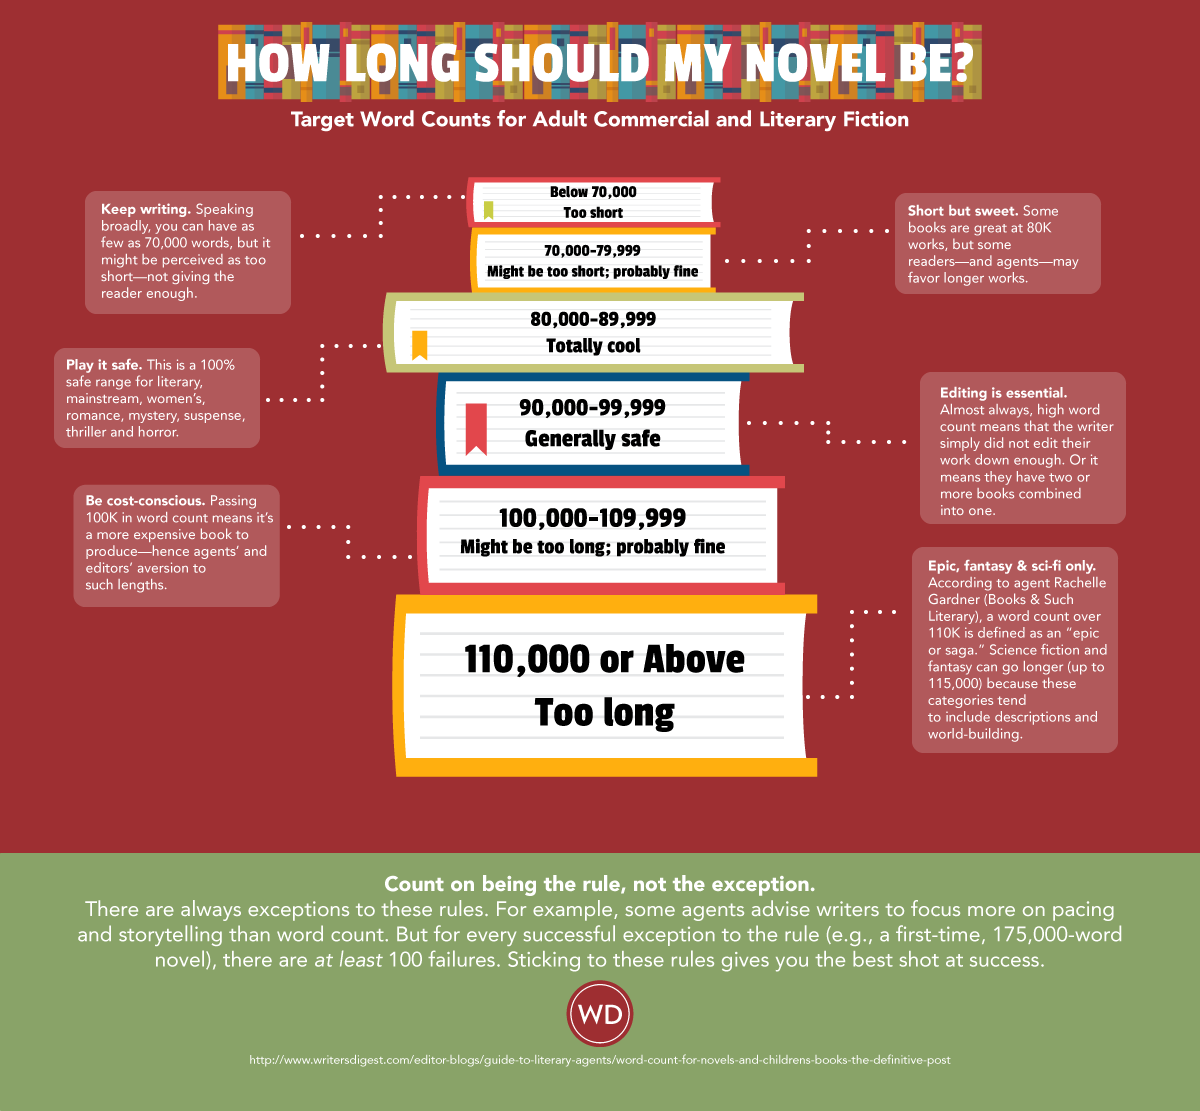 How long is a 300 000-word book?